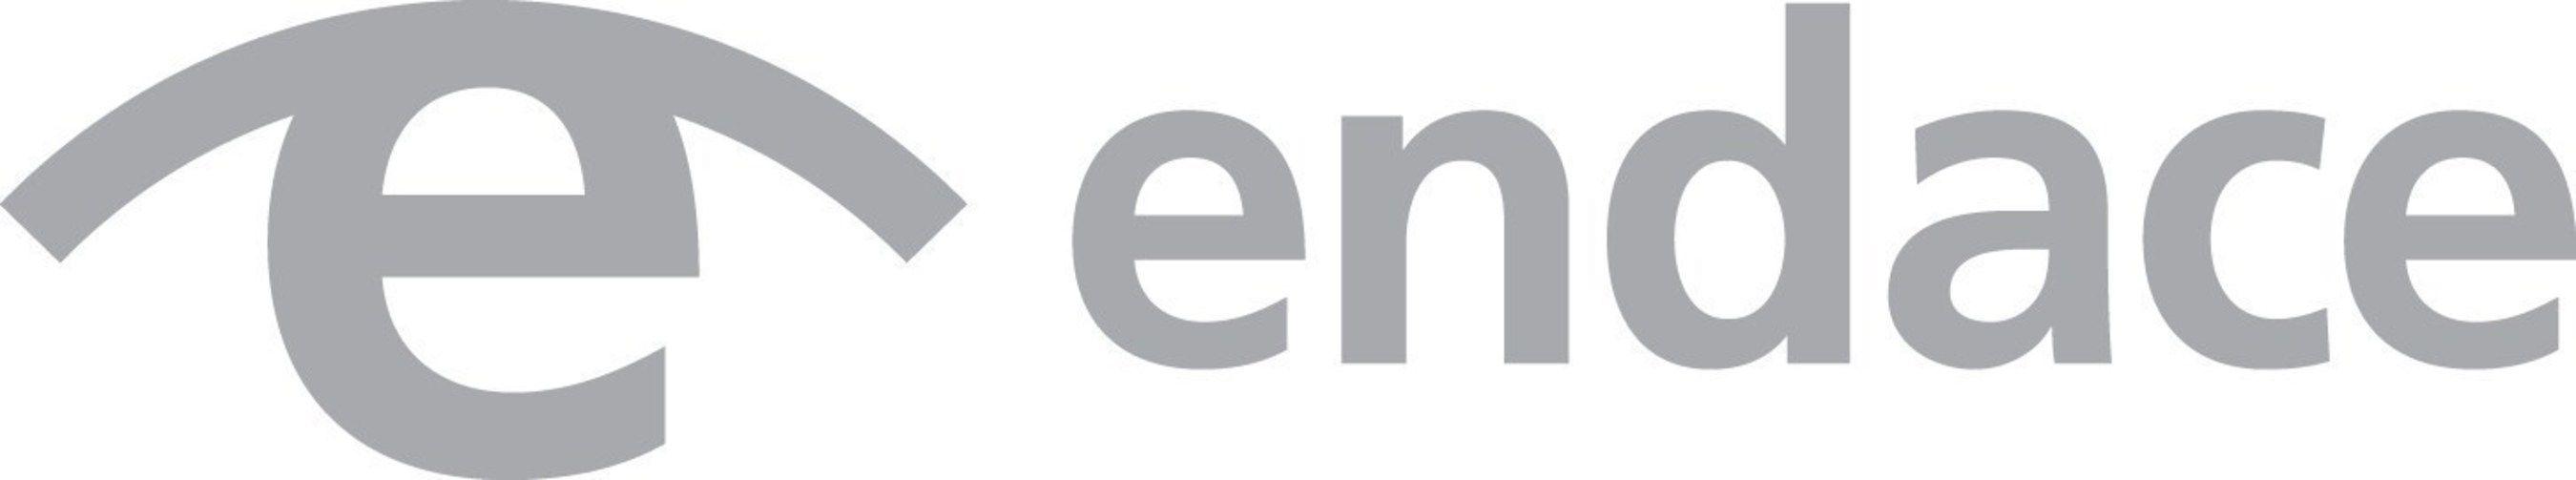 Emulex Logo - Endace Spins Off From Emulex In Management Led Buyout